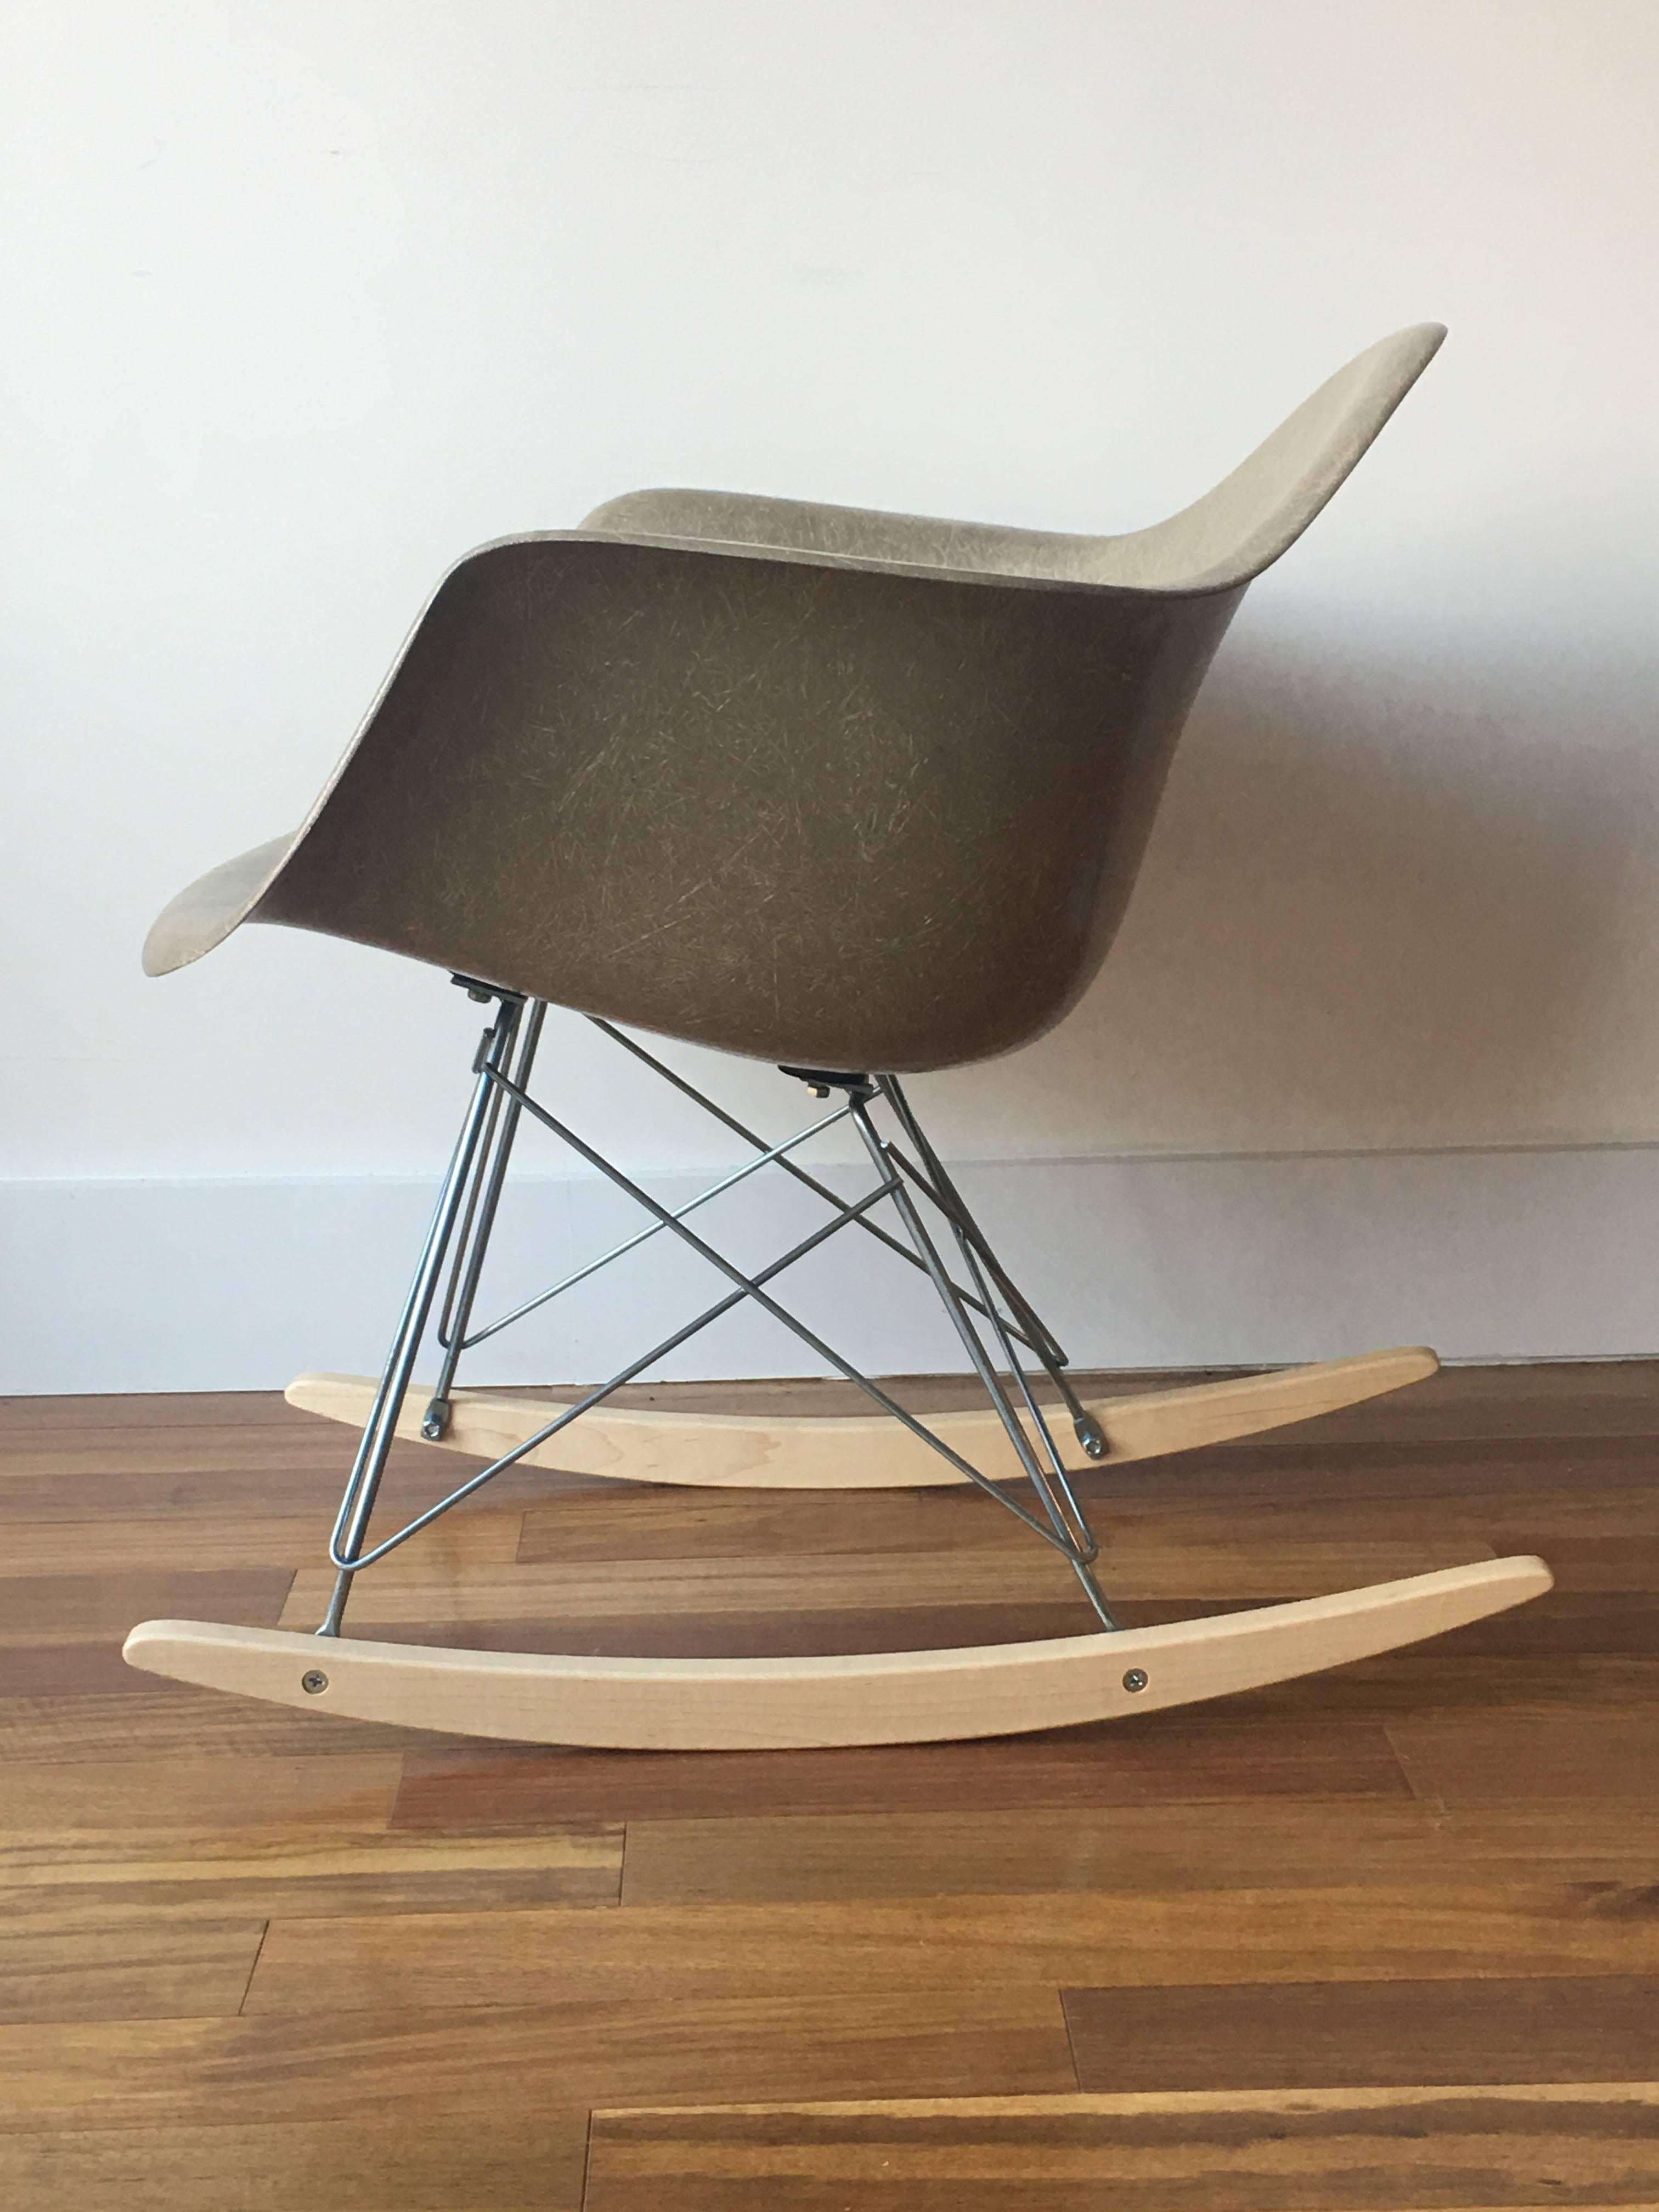 Herman Miller Eames RAR rocking chair in raw umber. Rare color. Shell in perfect condition. New modern conscience base.